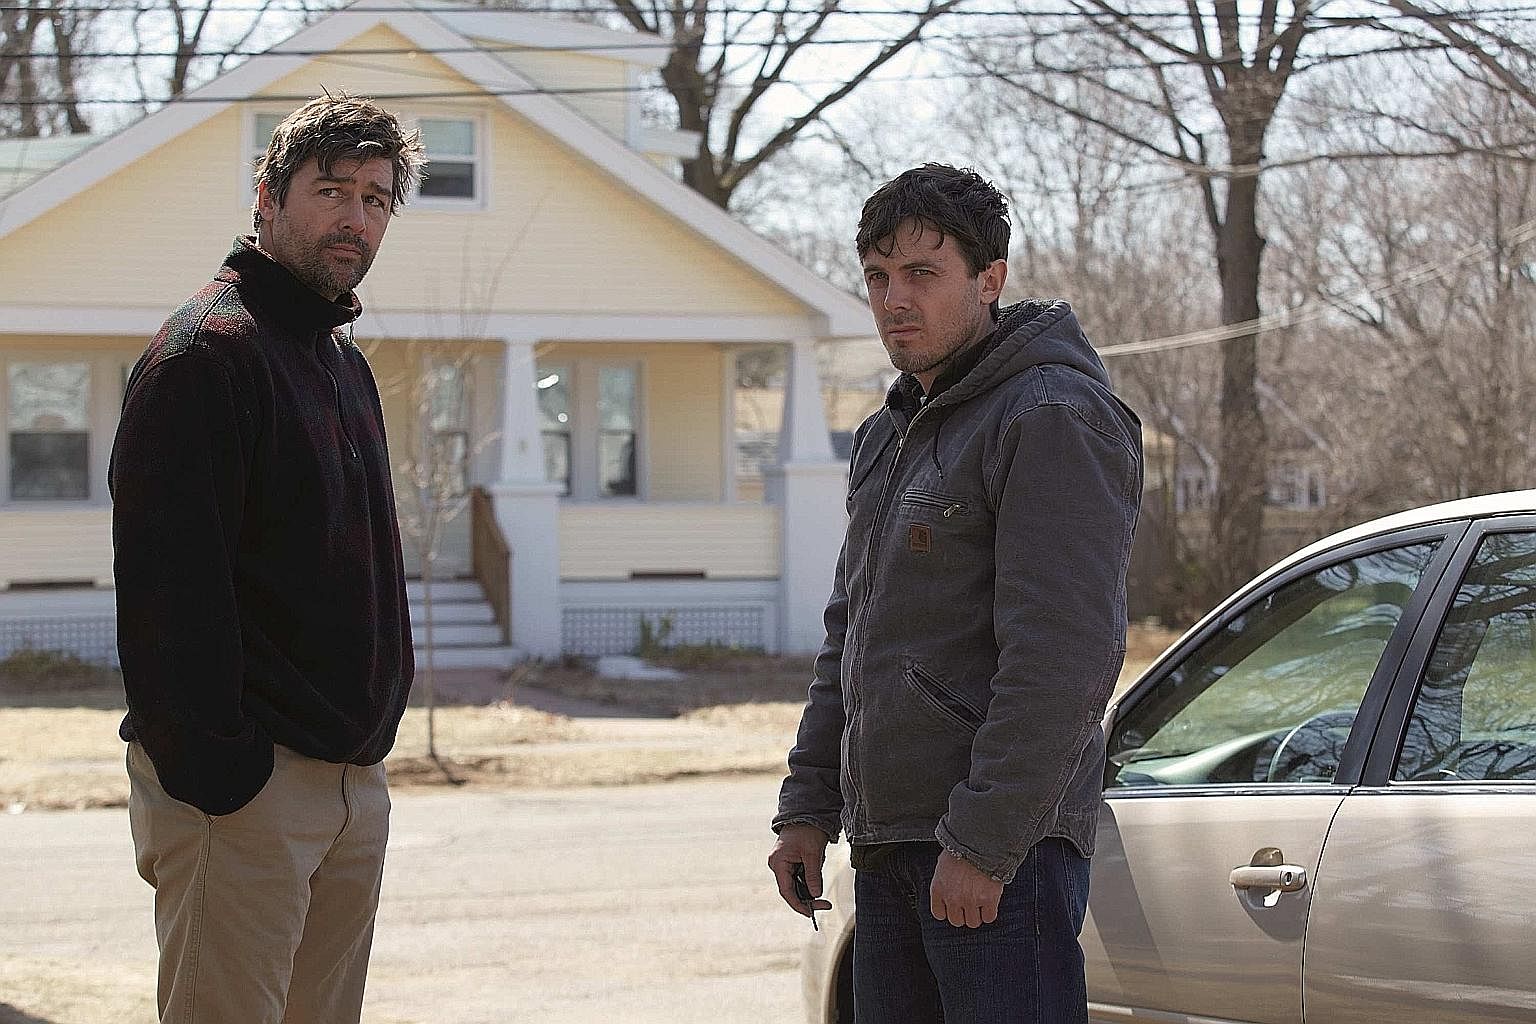 Manchester By The Sea stars Kyle Chandler (left) and Casey Affleck (right).